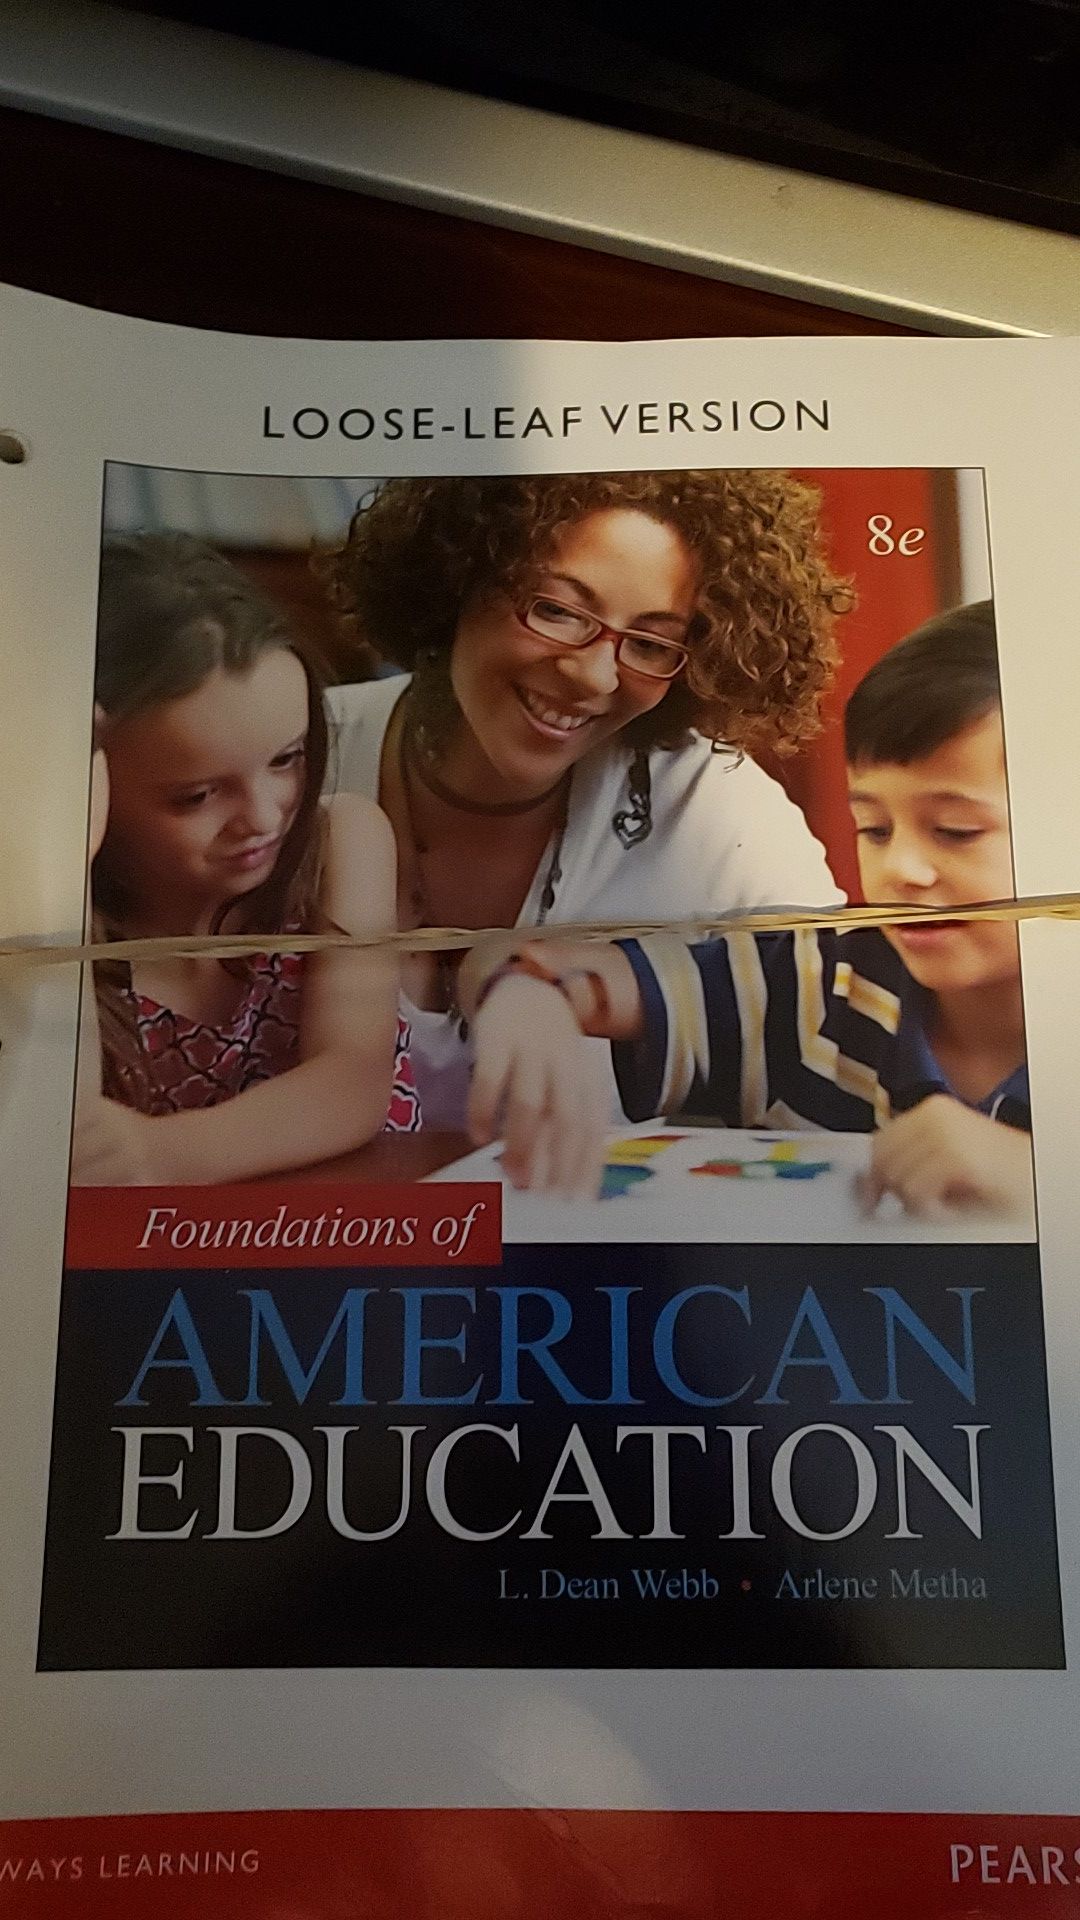 Foundations of American Education with e-textbook and access code